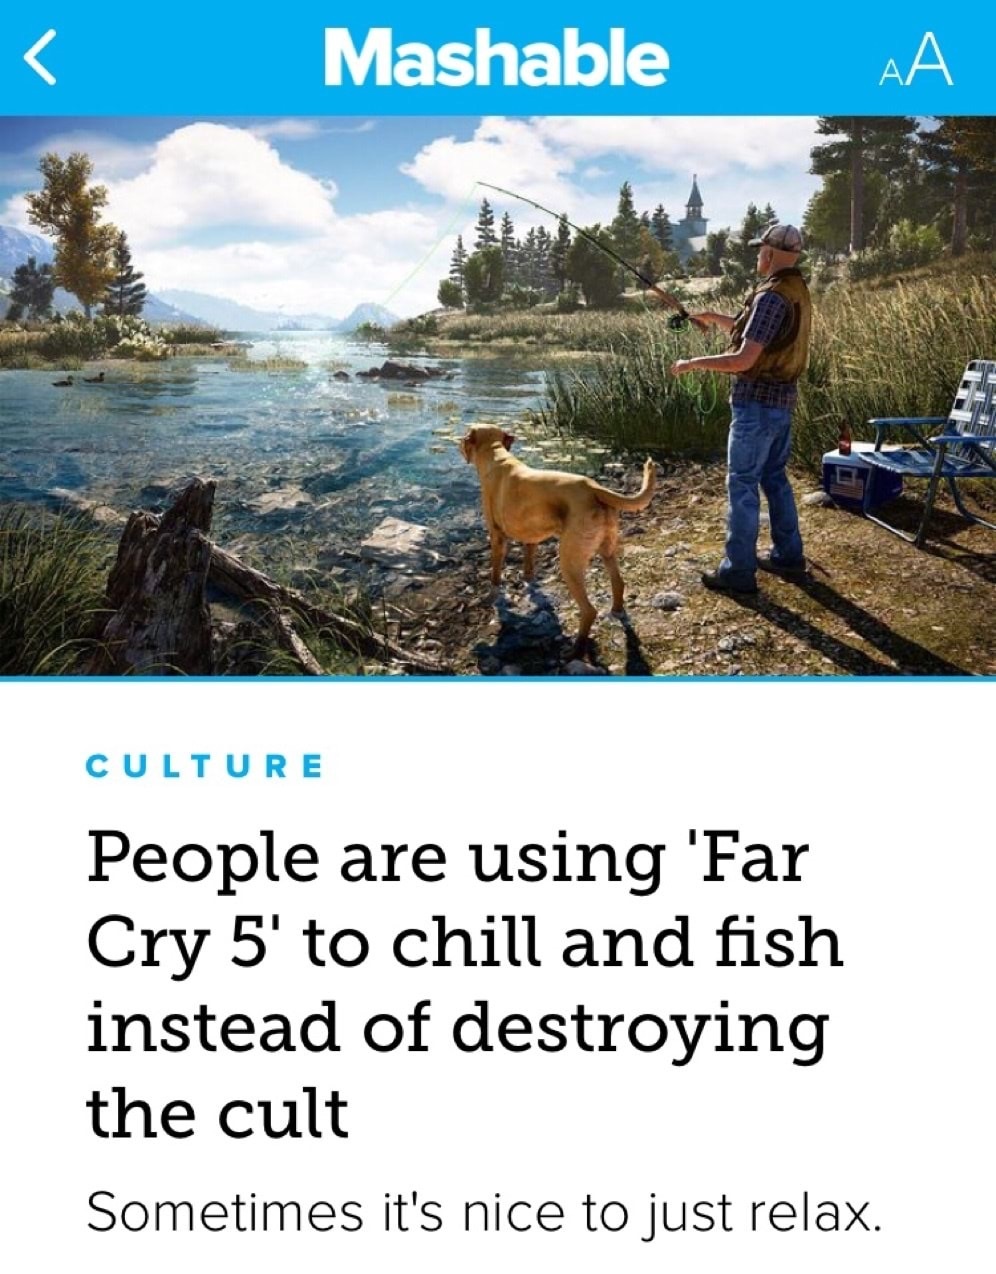 2018 xbox games - Mashable Aa Culture People are using 'Far Cry 5' to chill and fish instead of destroying the cult Sometimes it's nice to just relax.